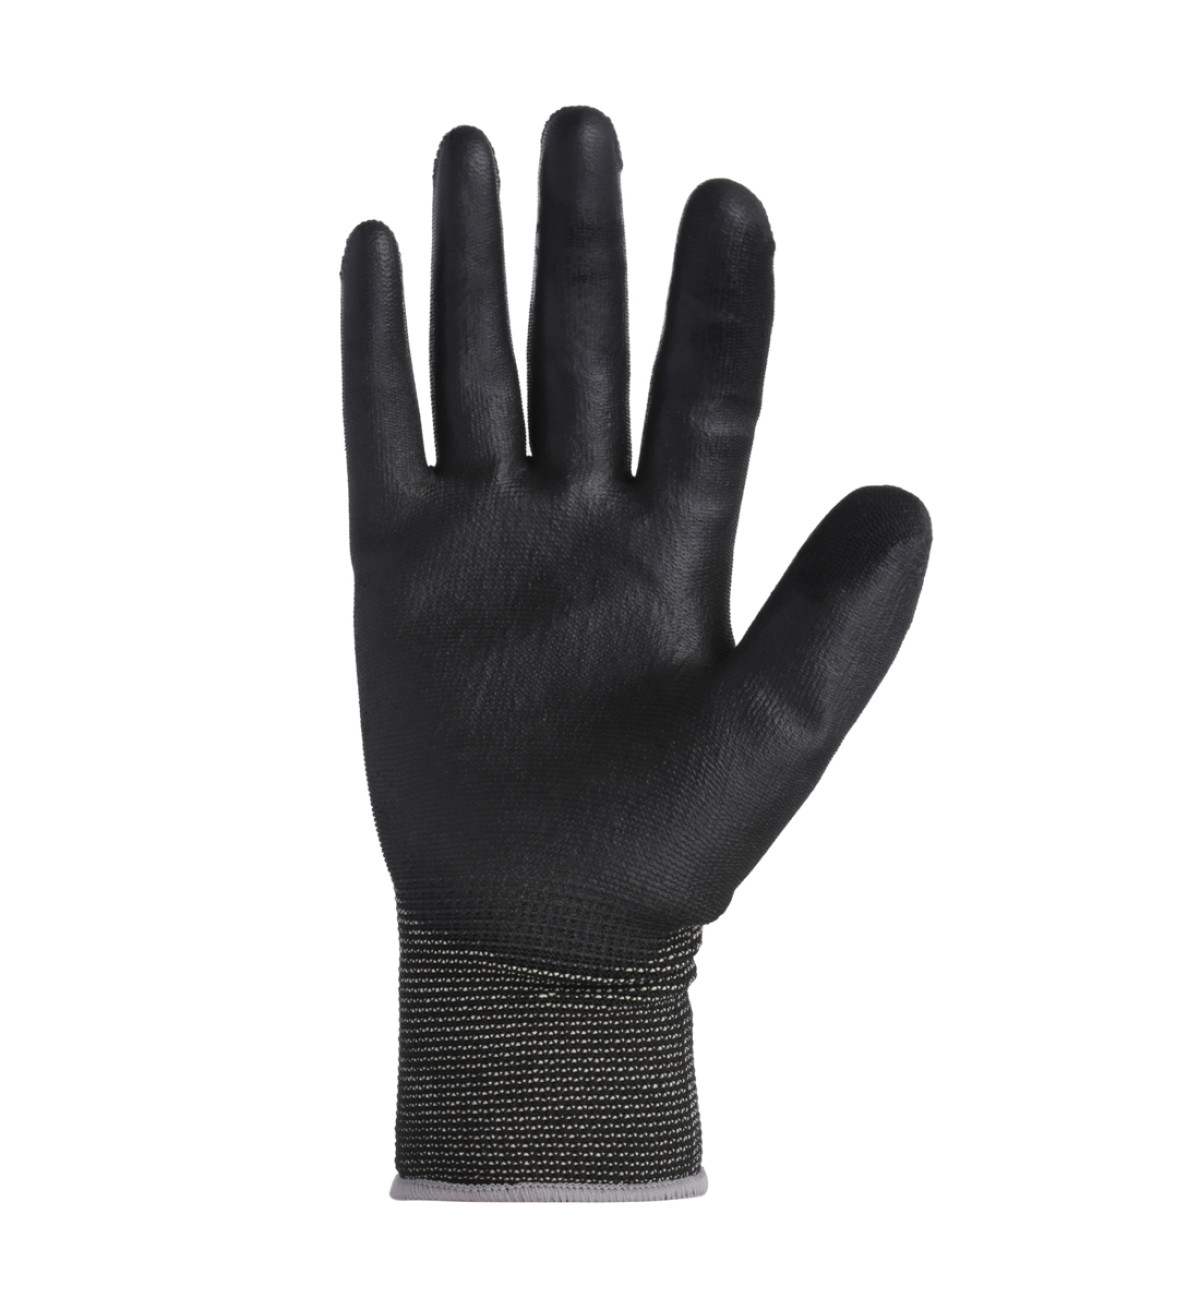 HS 22 | PU Gloves | Gloves For Pharmaceutical industry